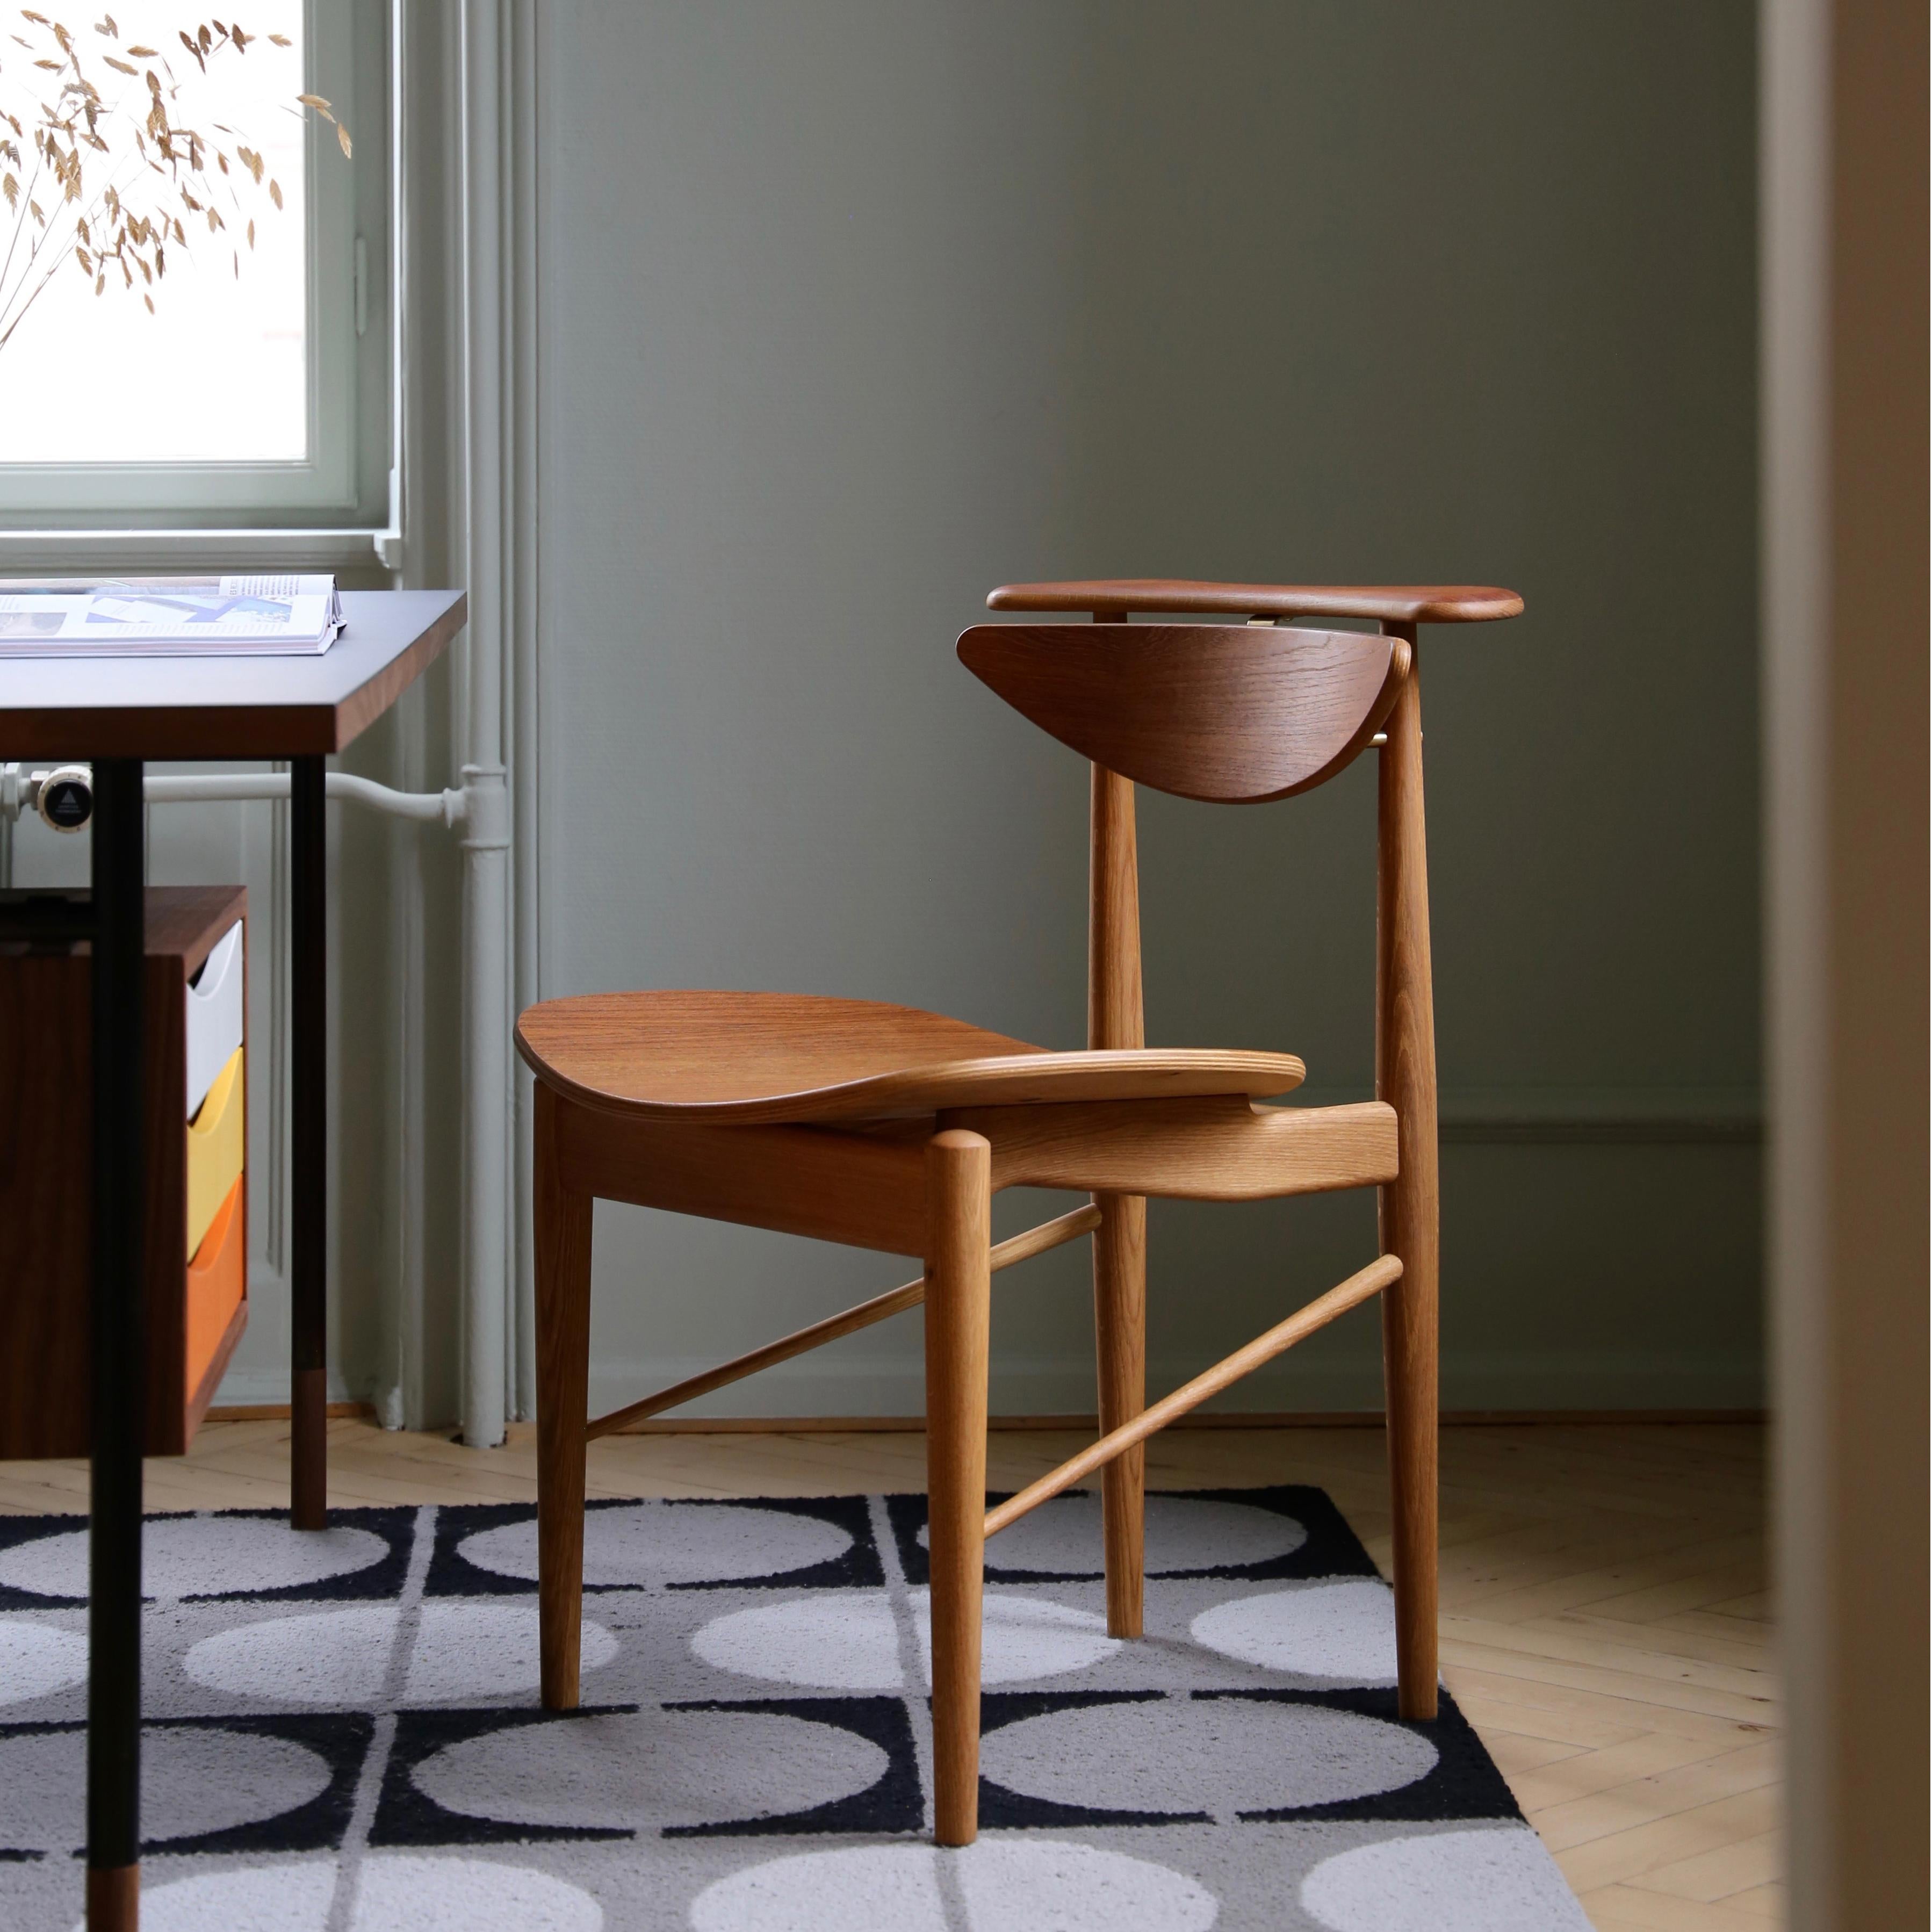 Chair designed by Finn Juhl in 1953, relaunched in 2015.
Manufactured by House of Finn Juhl in Denmark.

The Reading chair is one of Finn Juhl's more simple, yet elegant, pieces. The chair is characterized by intricate details and a quirky story.